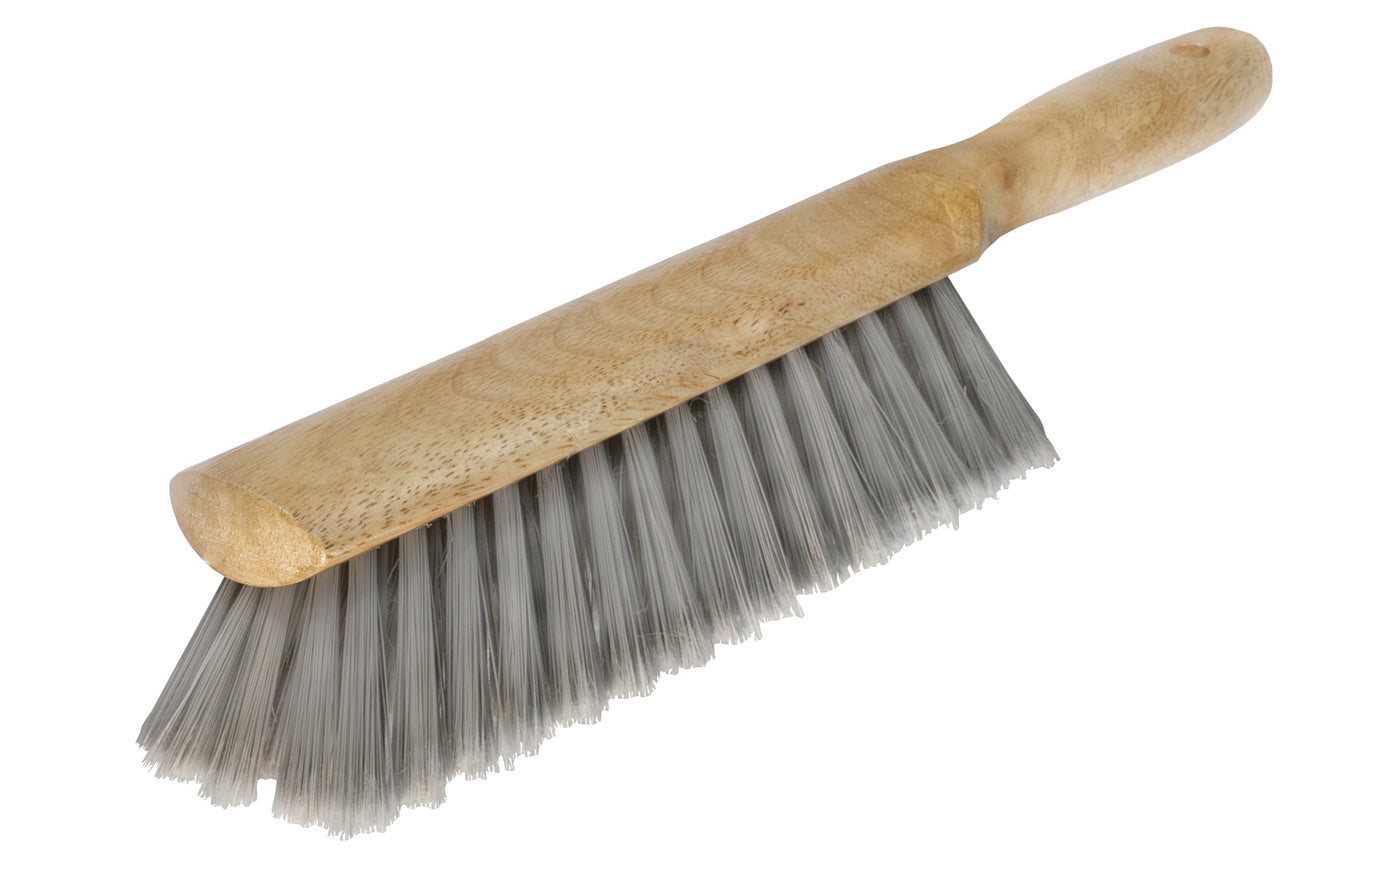 Bench Brush ~ Grey Flagged Poly Fiber Bristles - Magnolia Counter Duster Model No. 55 ~ Well-made duster ~ Bristles are staple set in clear lacquered hardwood block ~ Moderate/Light stiffness - Softer tip ends on bristles ~ Great for wood chips & general woodshop debris